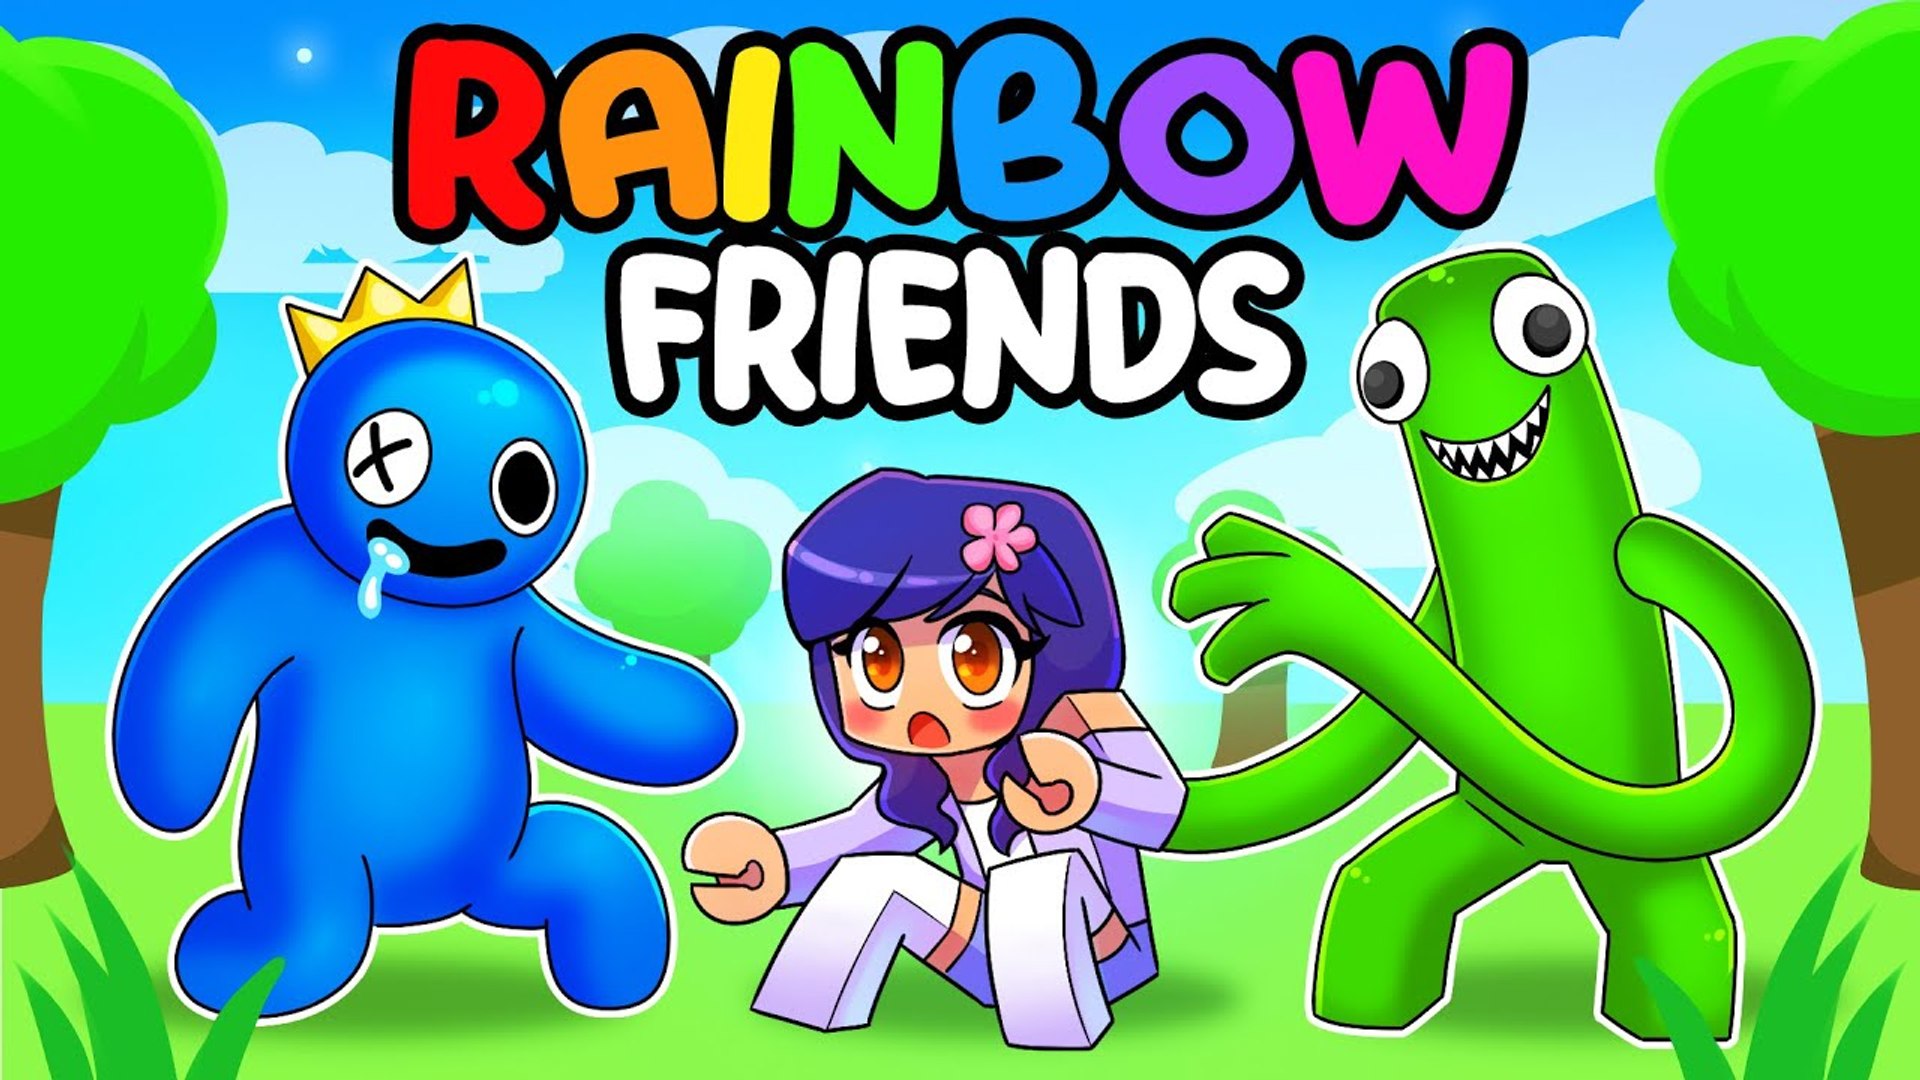 Playing RAINBOW FRIENDS in Roblox! - video Dailymotion